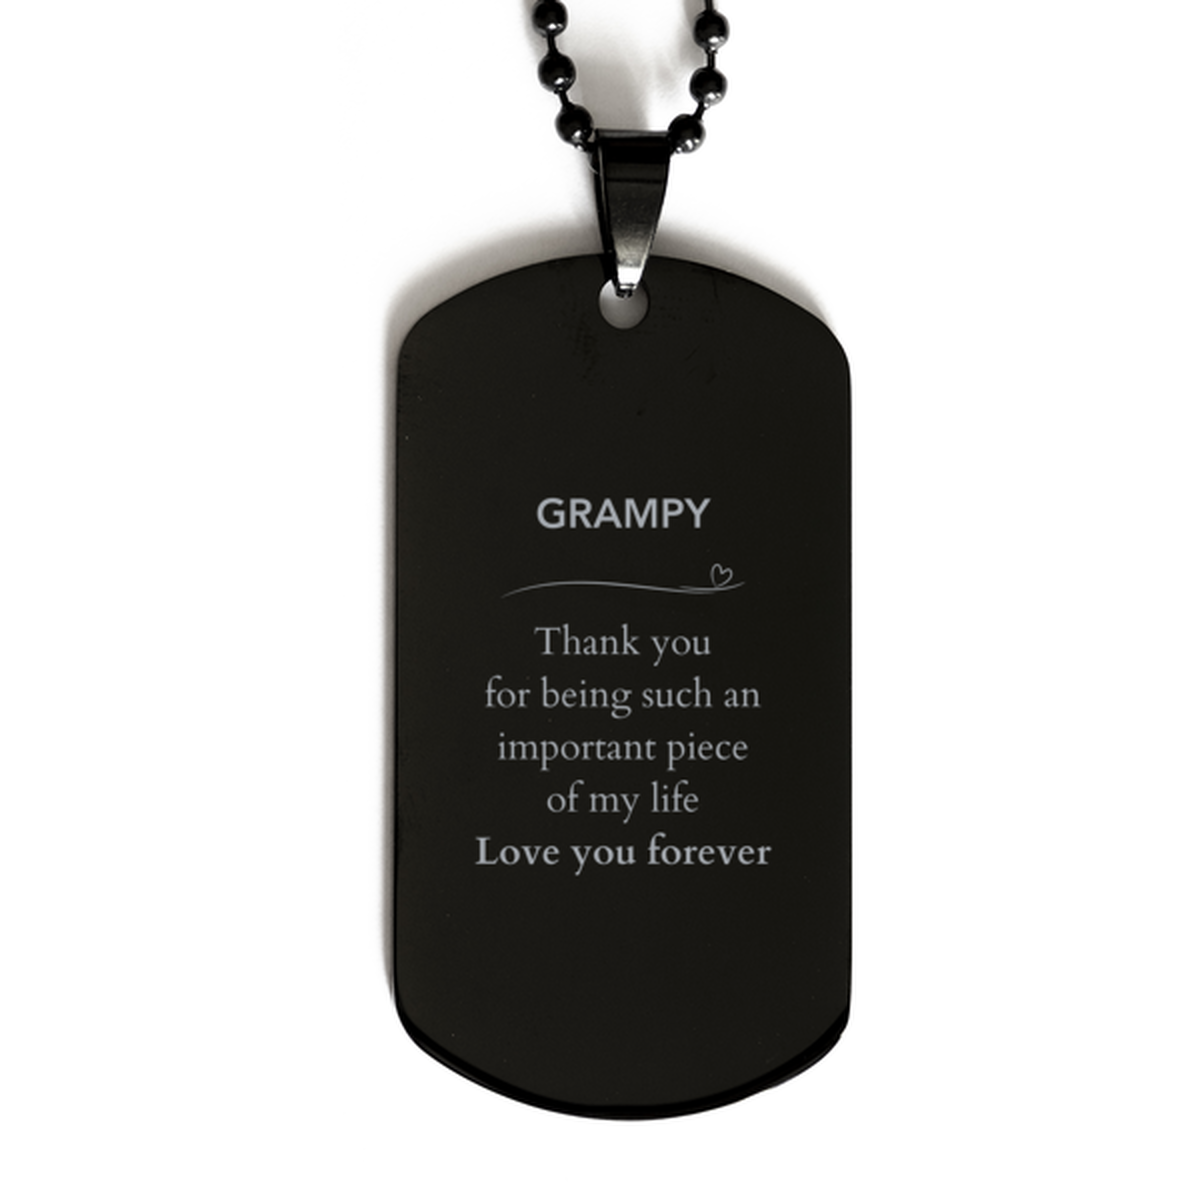 Appropriate Grampy Black Dog Tag Epic Birthday Gifts for Grampy Thank you for being such an important piece of my life Grampy Christmas Mothers Fathers Day